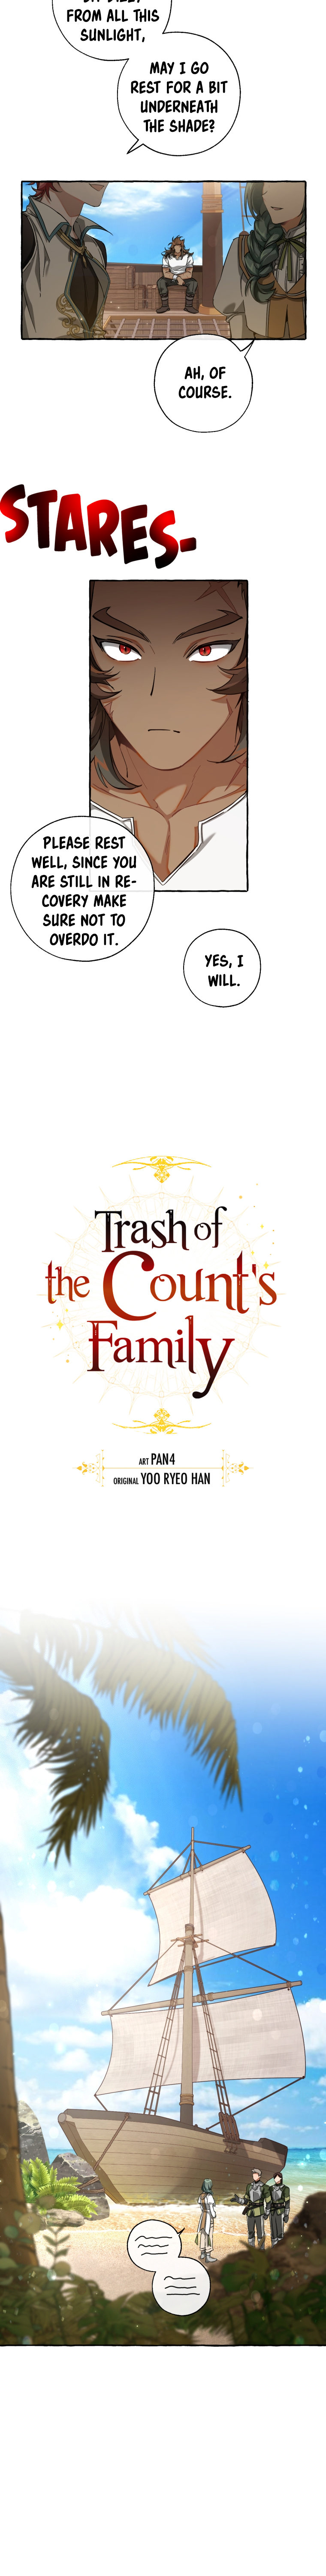 Trash of the Count